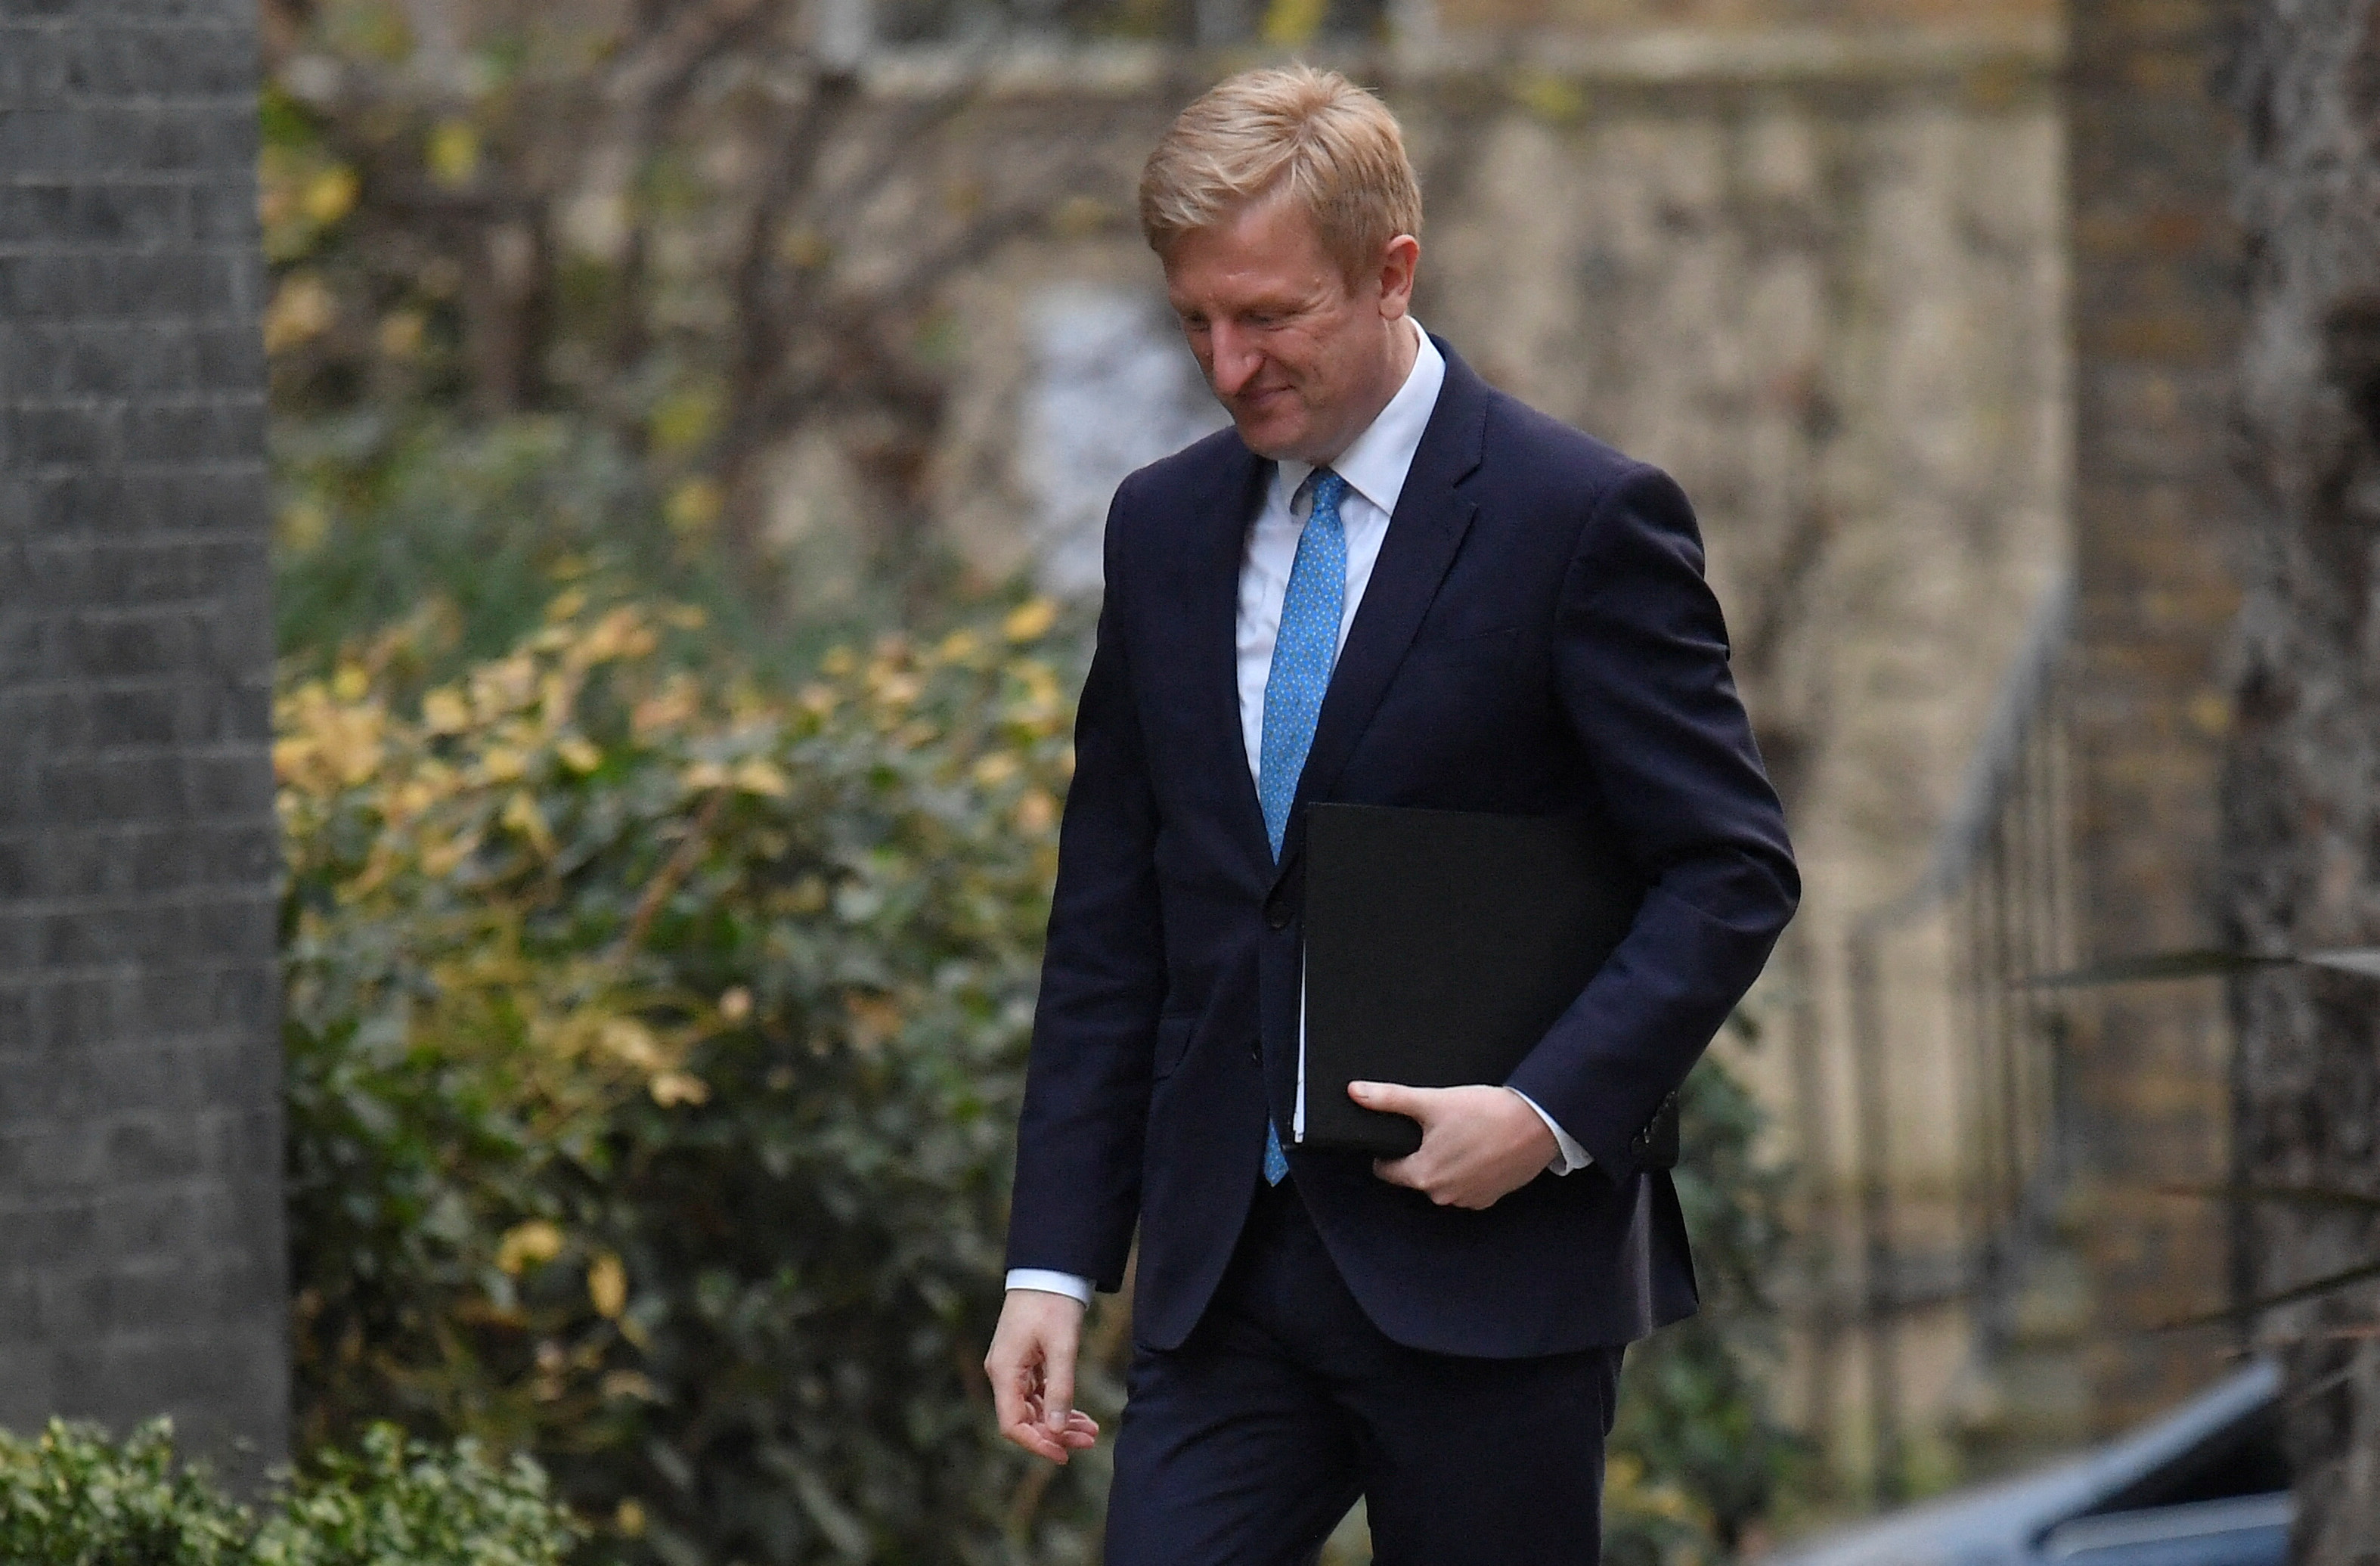 Co-Chairman of British Conservative Party Dowden walks outside Downing Street in London